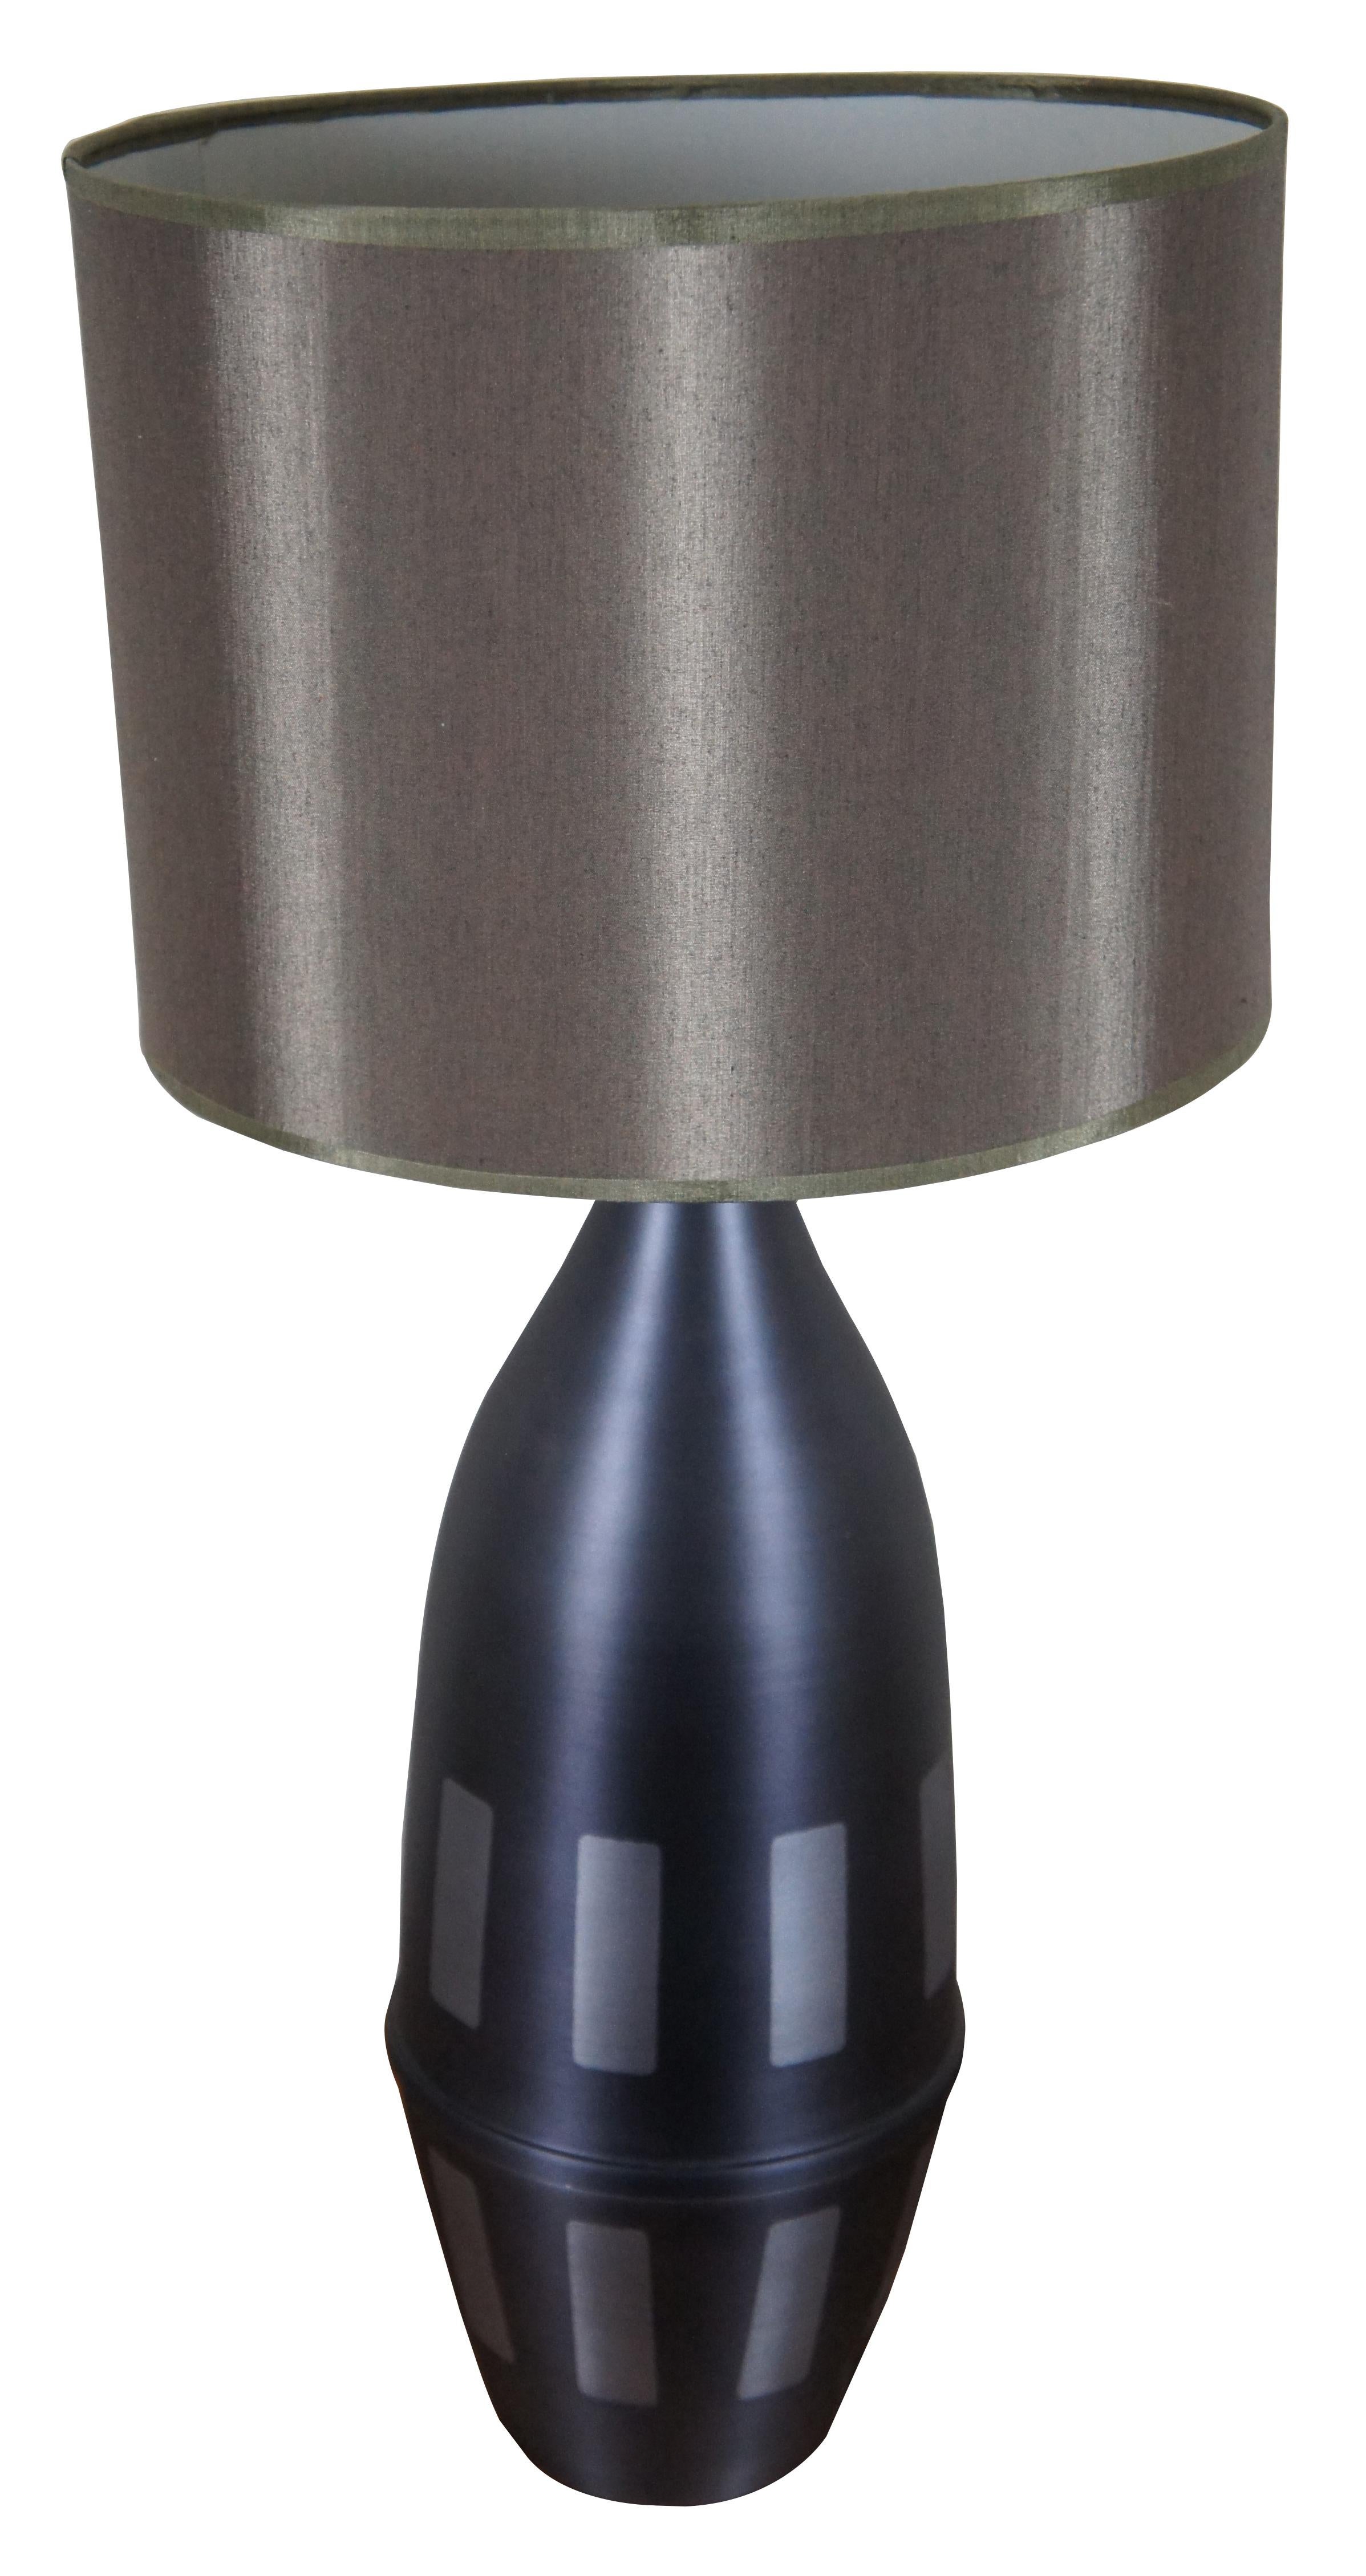 Vintage Babette Holland spun metal Juggler table lamp in graphite gray with geometric accents and an olive brown shade. The Juggler table lamp gets its name from its shape, which is similar to the pins juggled by a jester or clown. Style